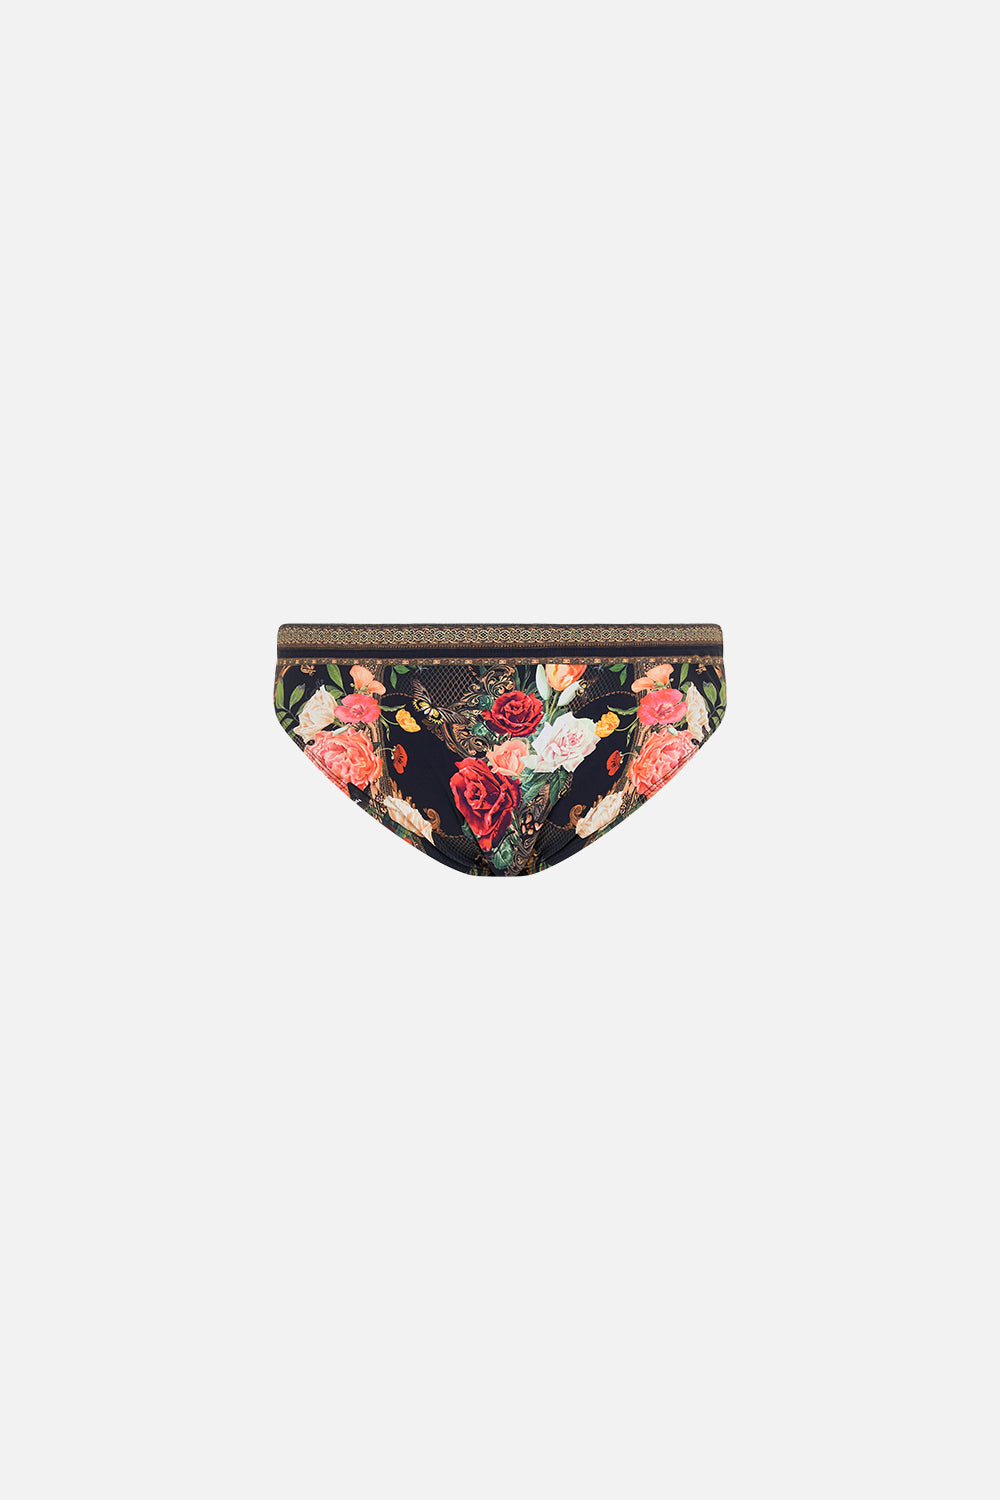 Hotel Franks by CAMILLA floral men's athletic swim brief in Magic in the Manuscripts